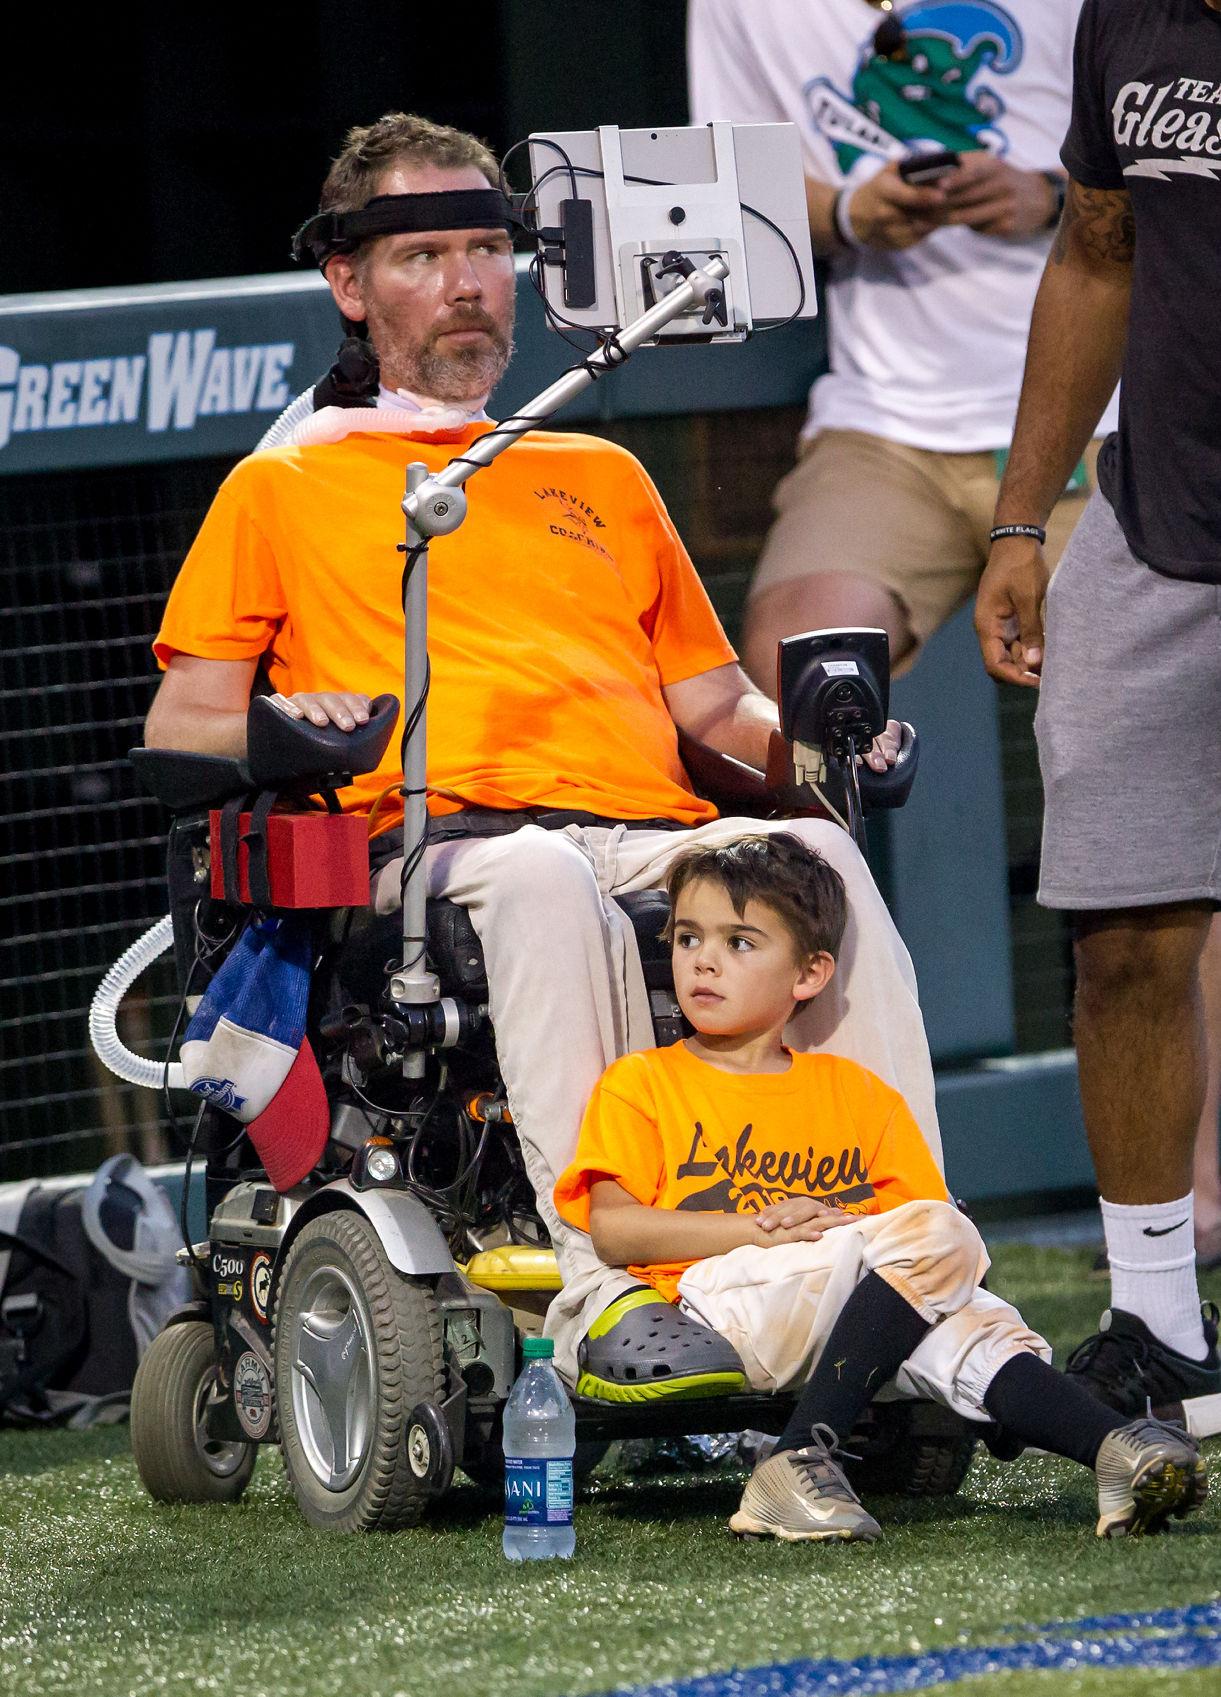 Documentary on Saints legend Steve Gleason nominated for two Sports